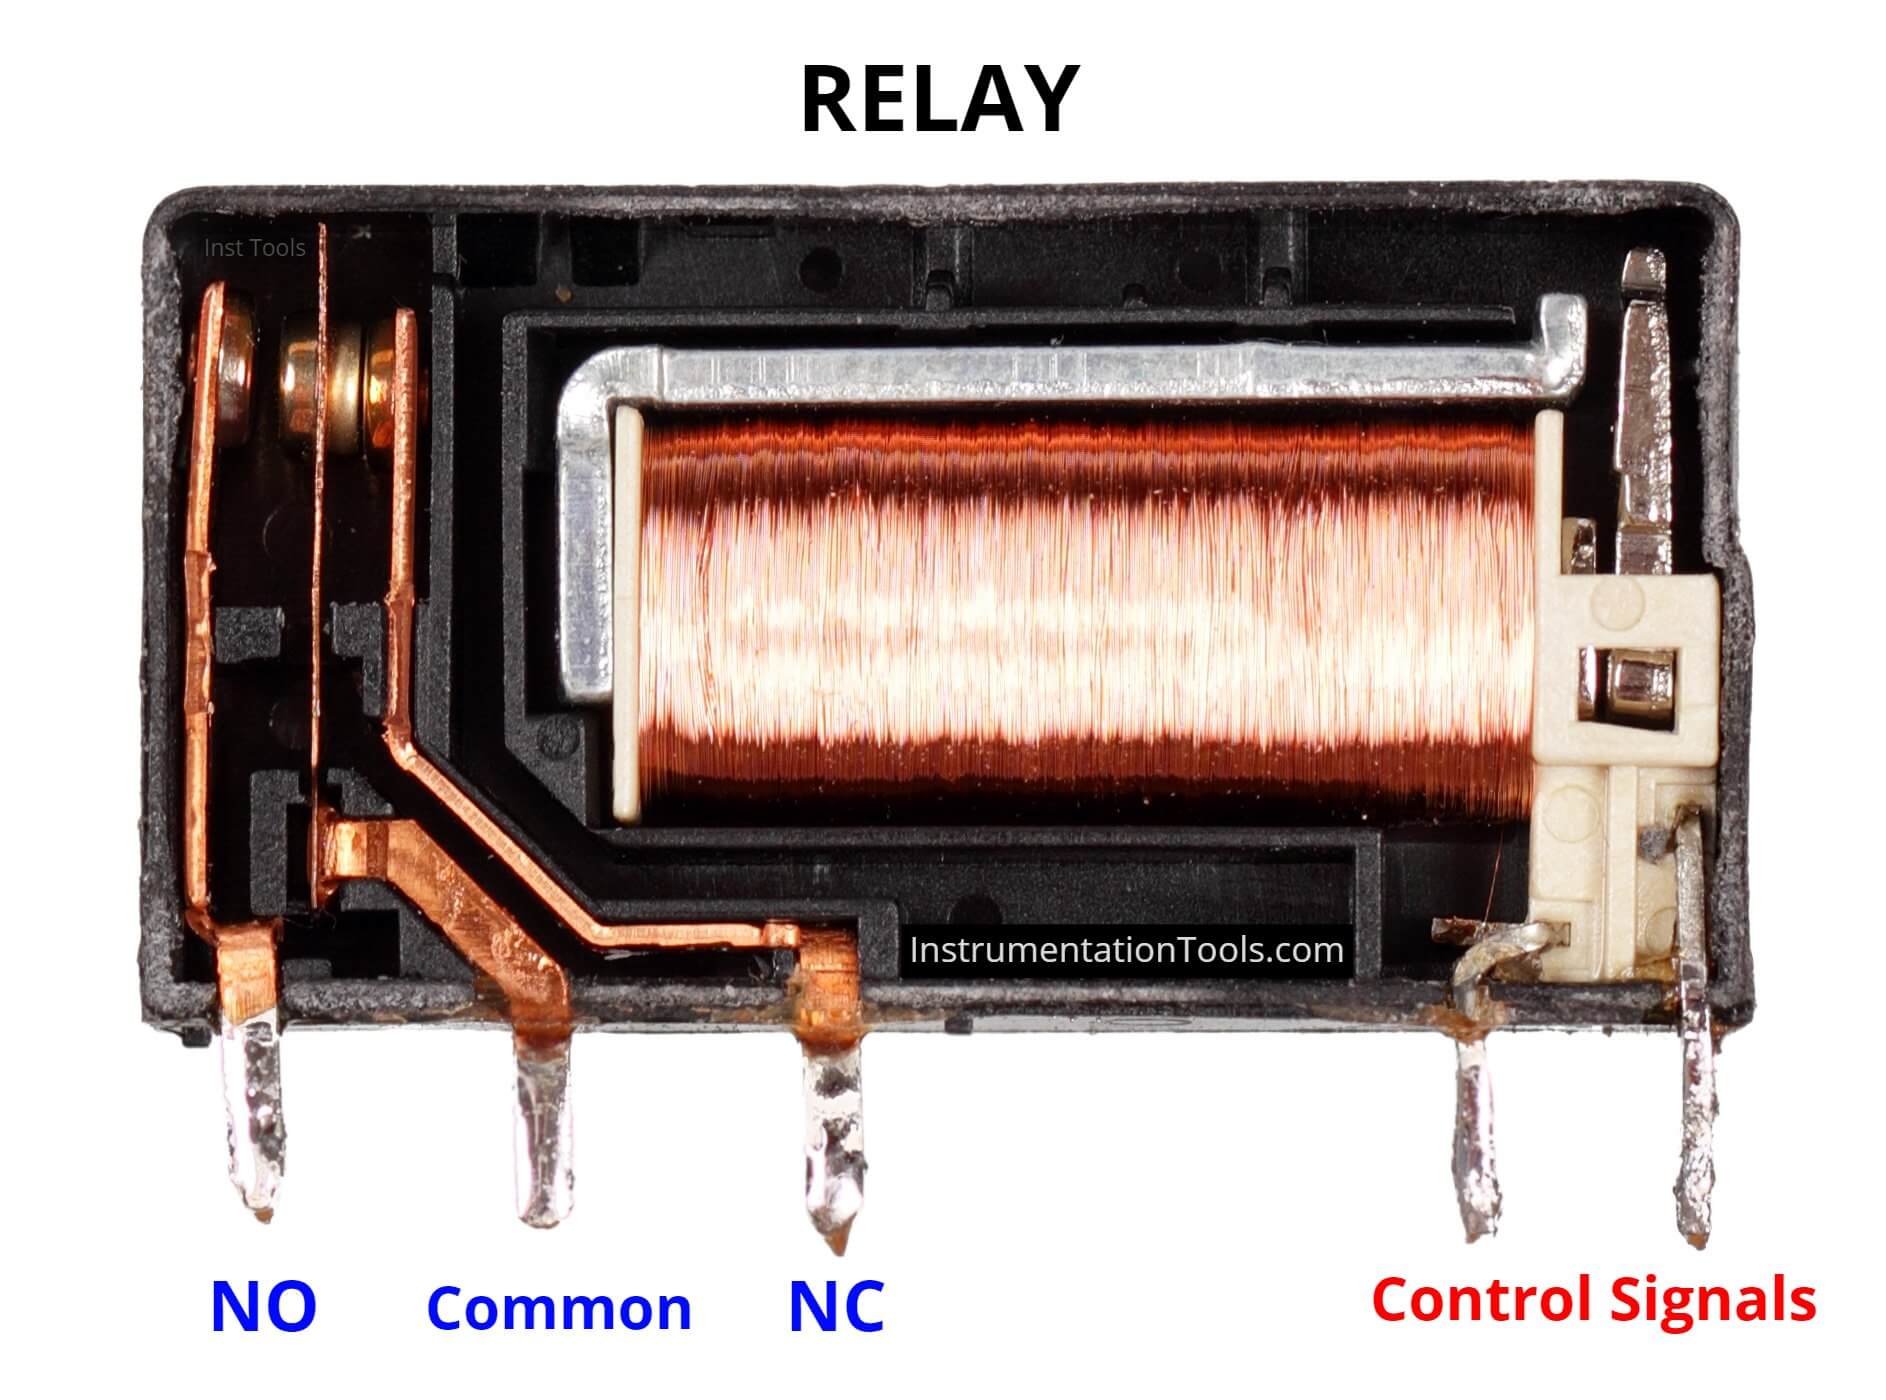 Basic Concepts of the Safety Relay